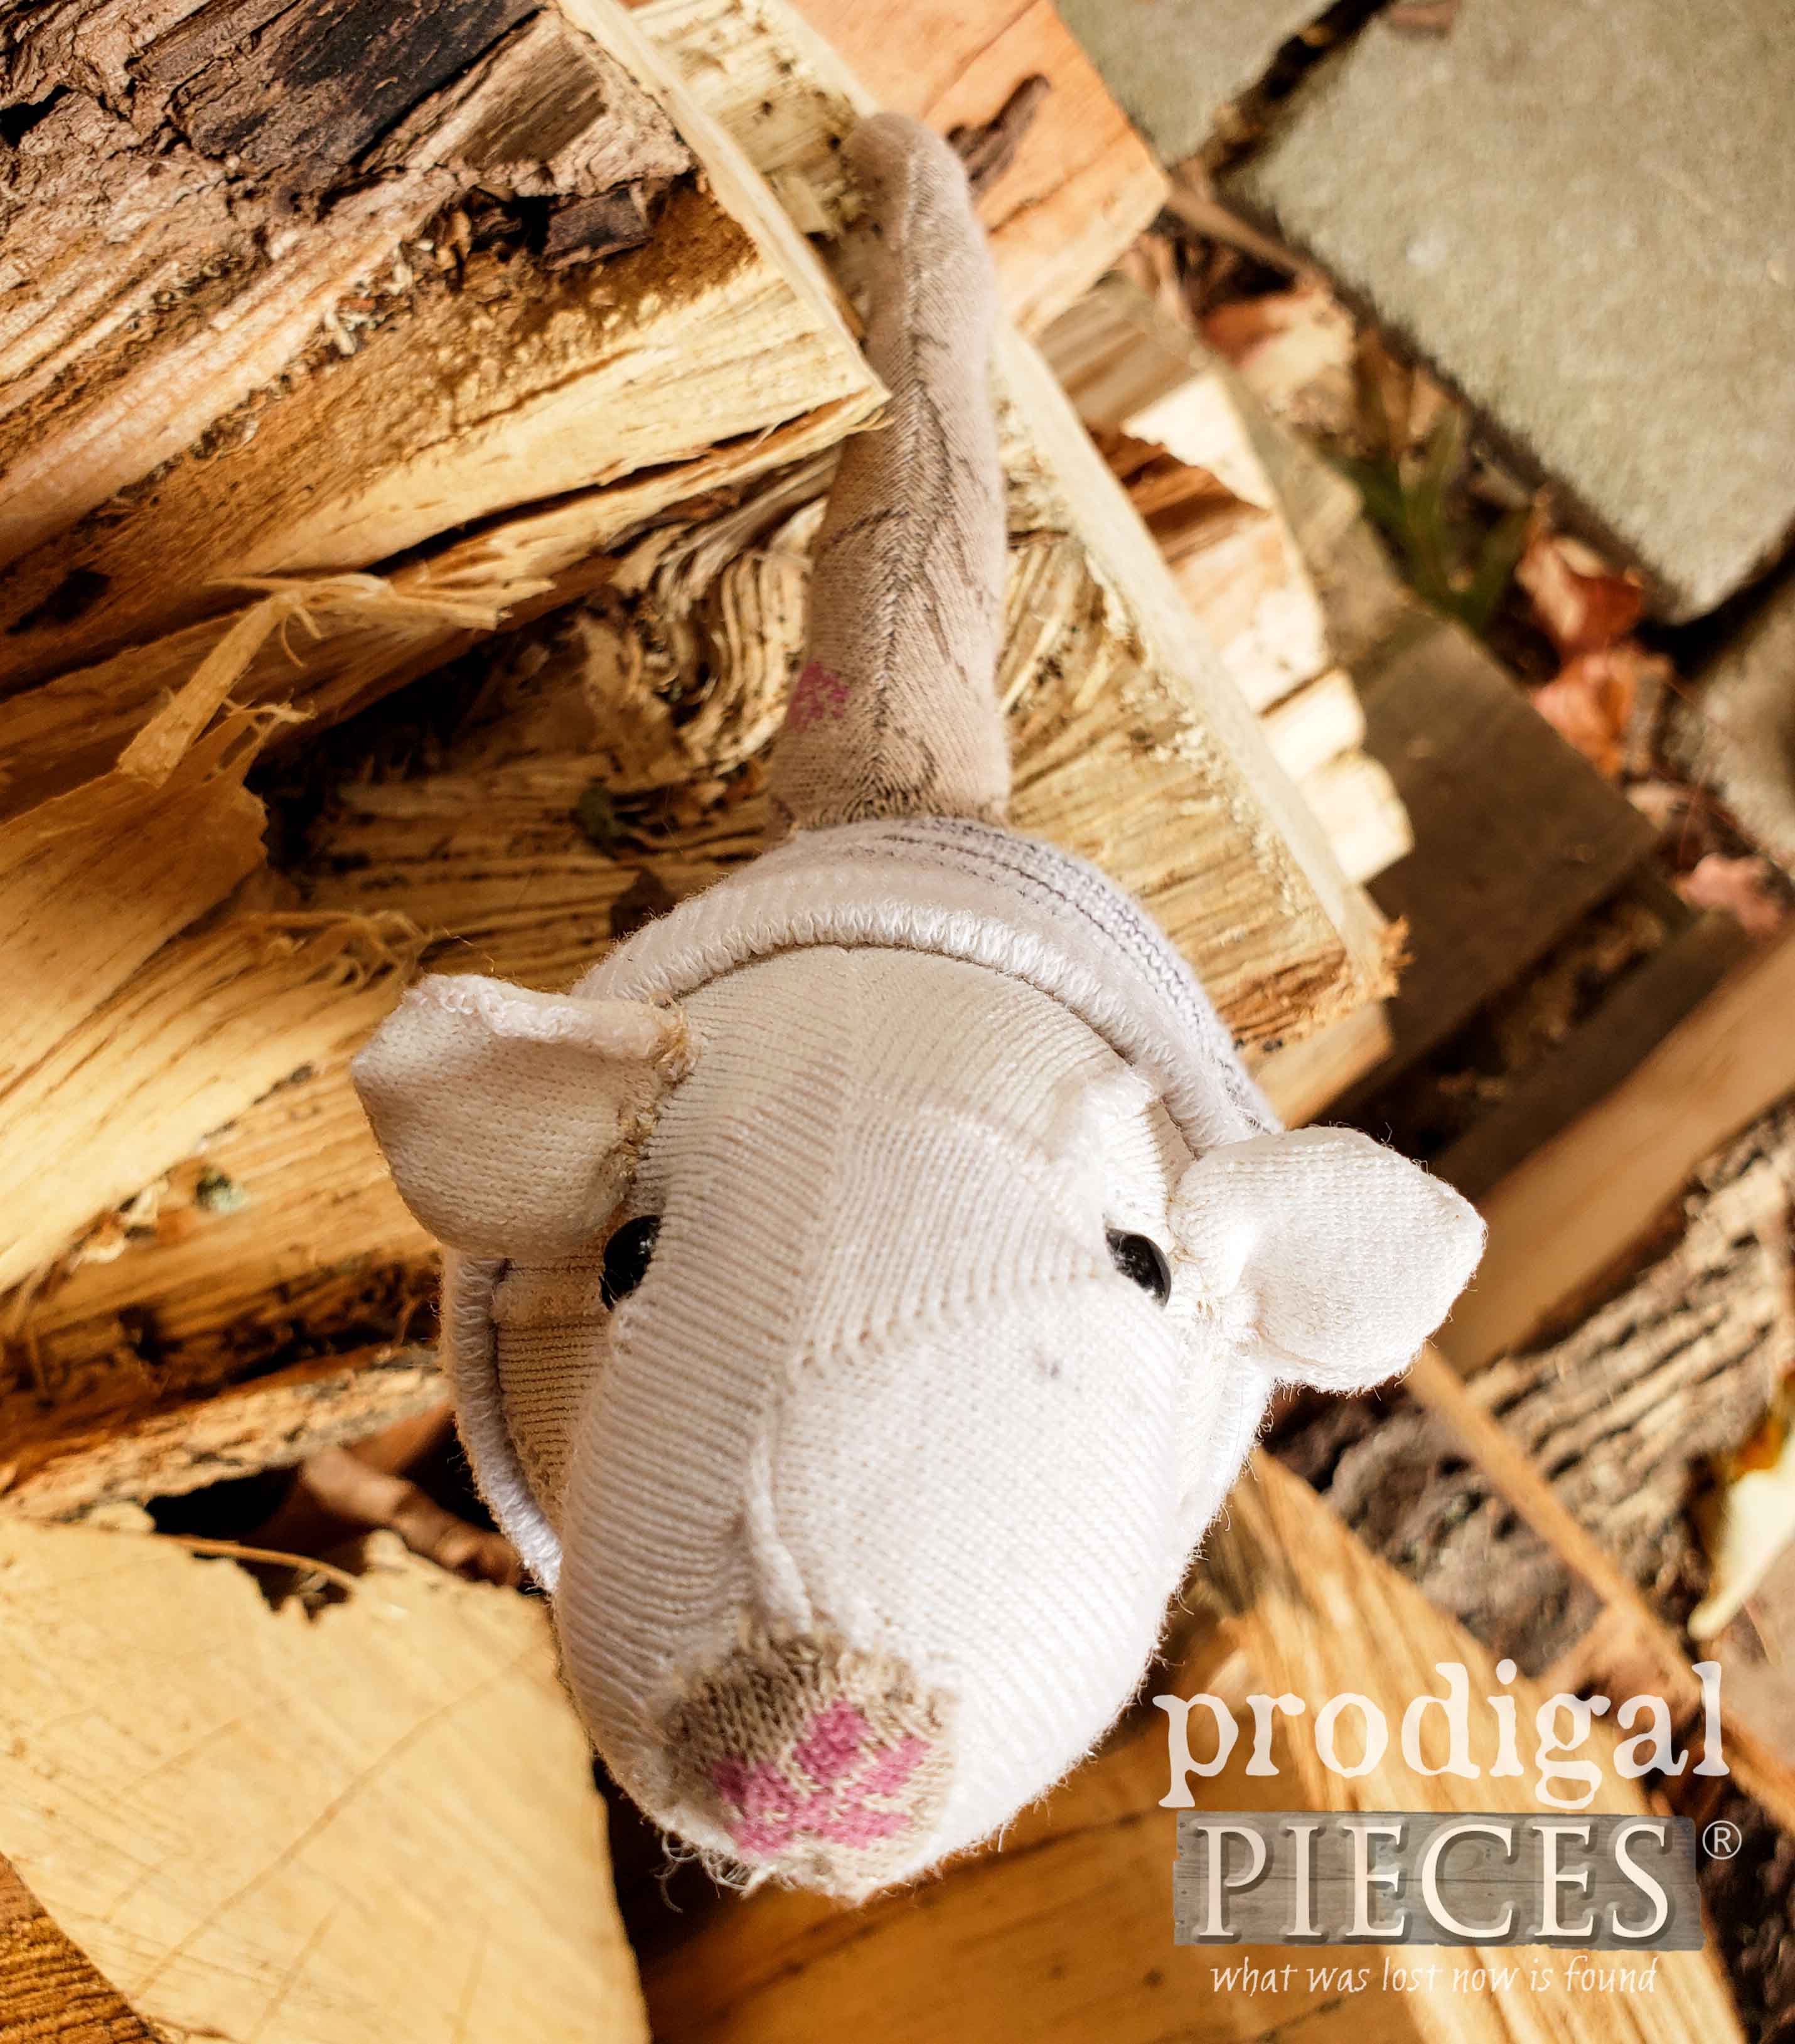 Super Sweet Handmade Sock Mouse by Larissa of Prodigal Pieces | prodigalpieces.com #prodigalpieces #diy #handmade #doll #toy #sewing